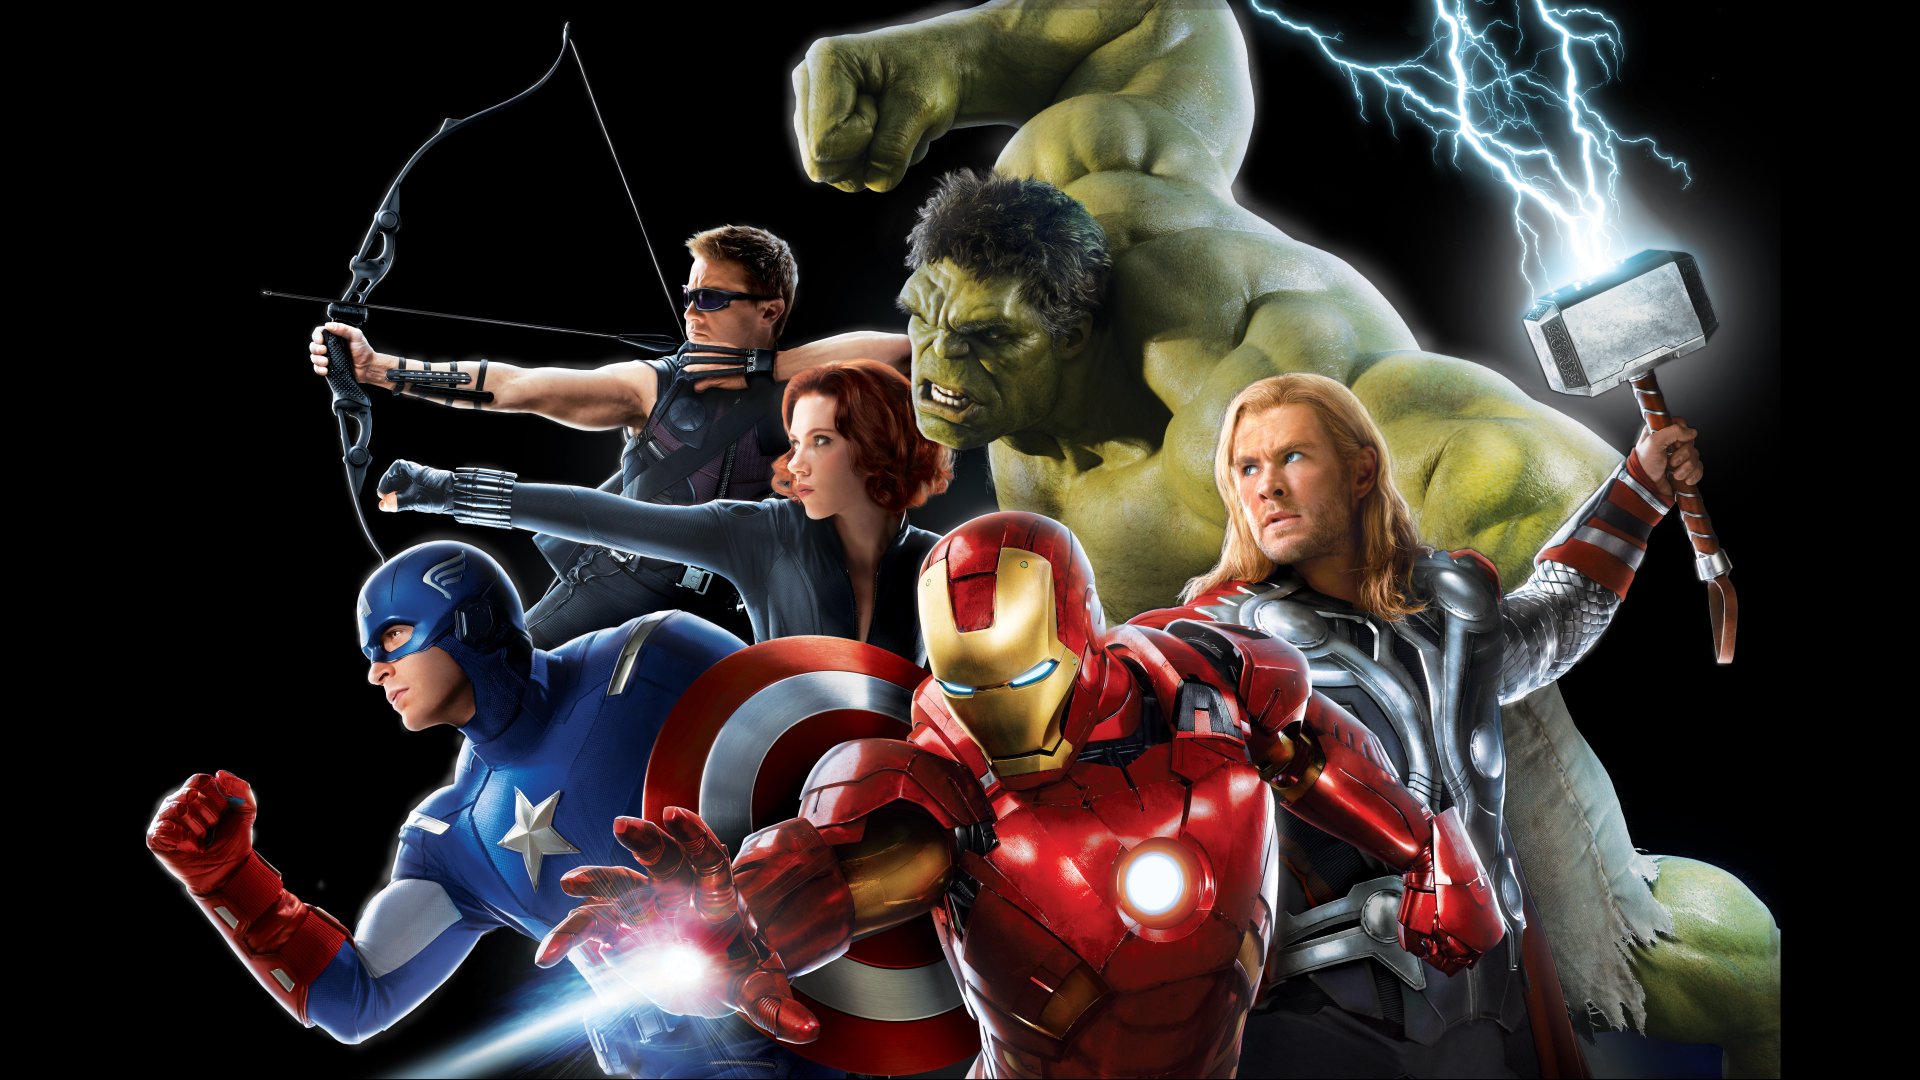 The Avengers download the new version for windows